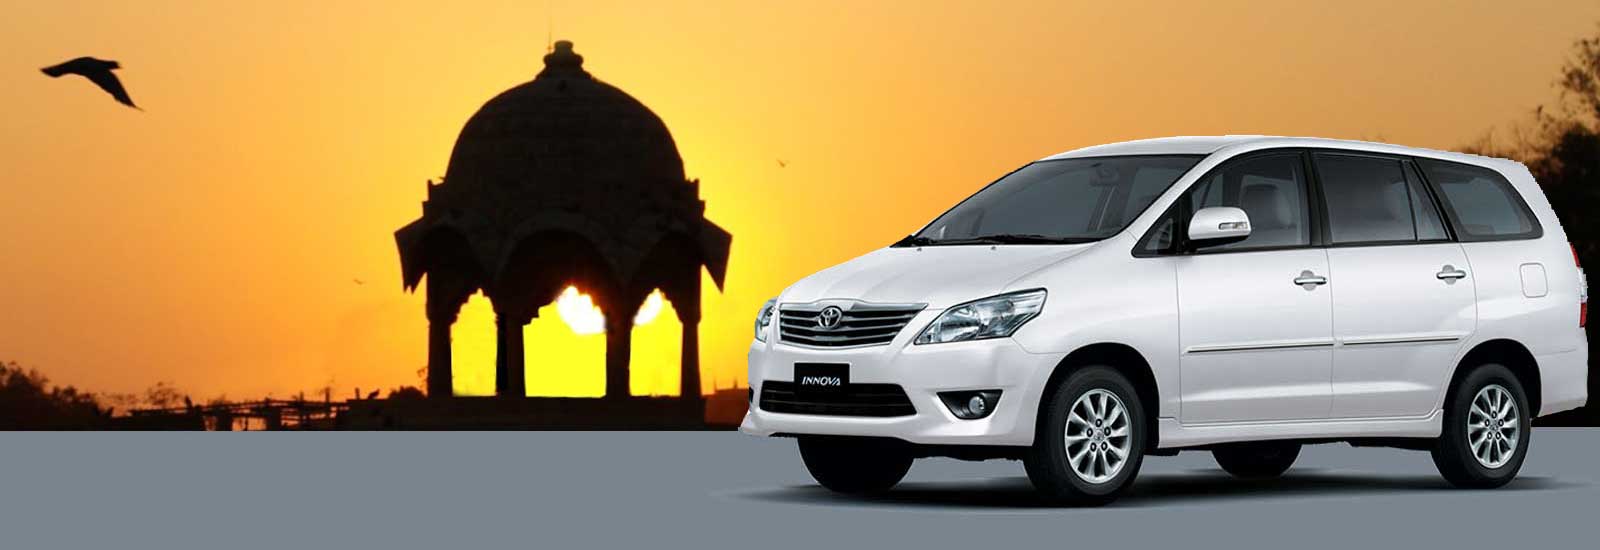 Hire Rajasthan Taxi Service to Enjoy Countless Benefits